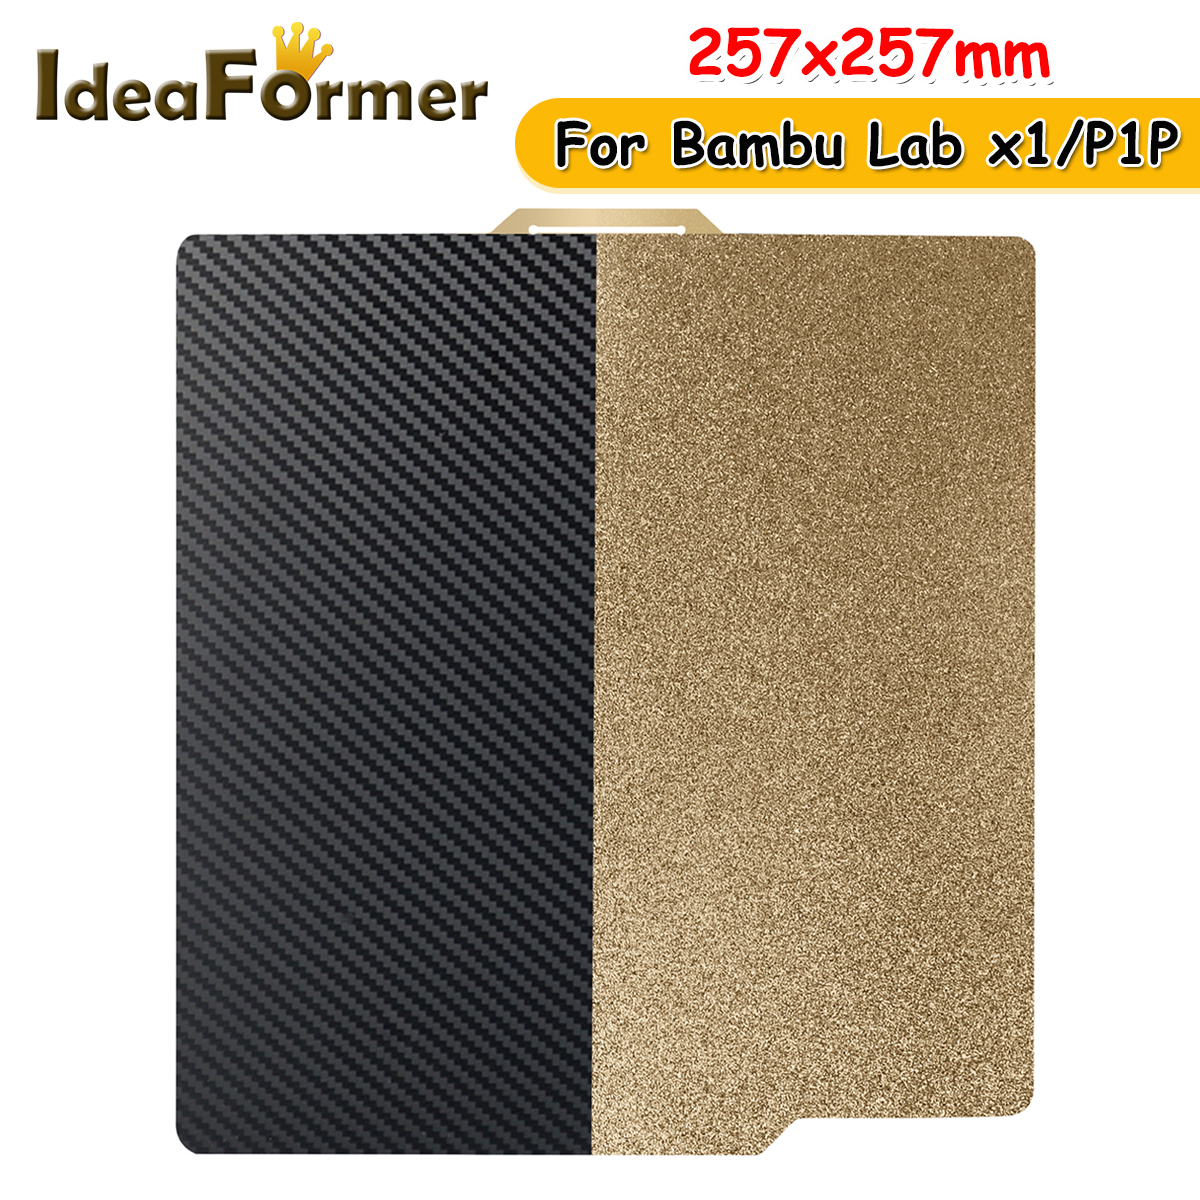 IdeaFormer Upgrade Double Sided PED/PEY/PET+PEI Build Plate Spring Steel Sheet 3D Printer Heat Bed for Bambu Lab X1